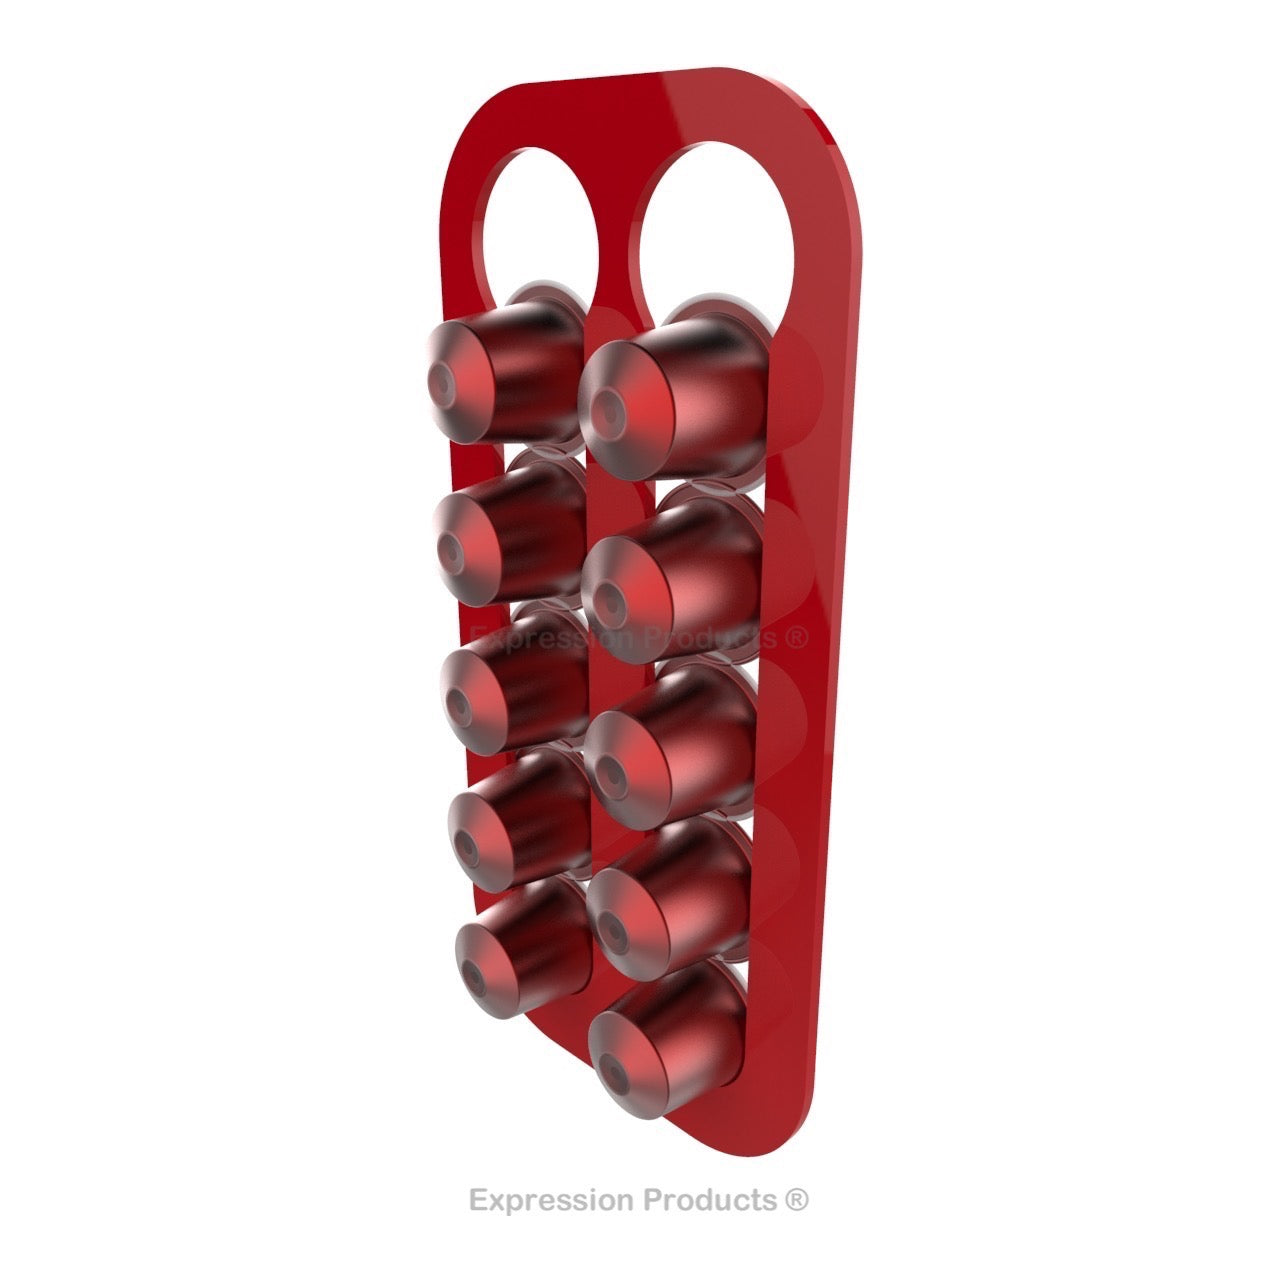 Magnetic Nespresso Original Line coffee pod holder shown in red holding 10 pods